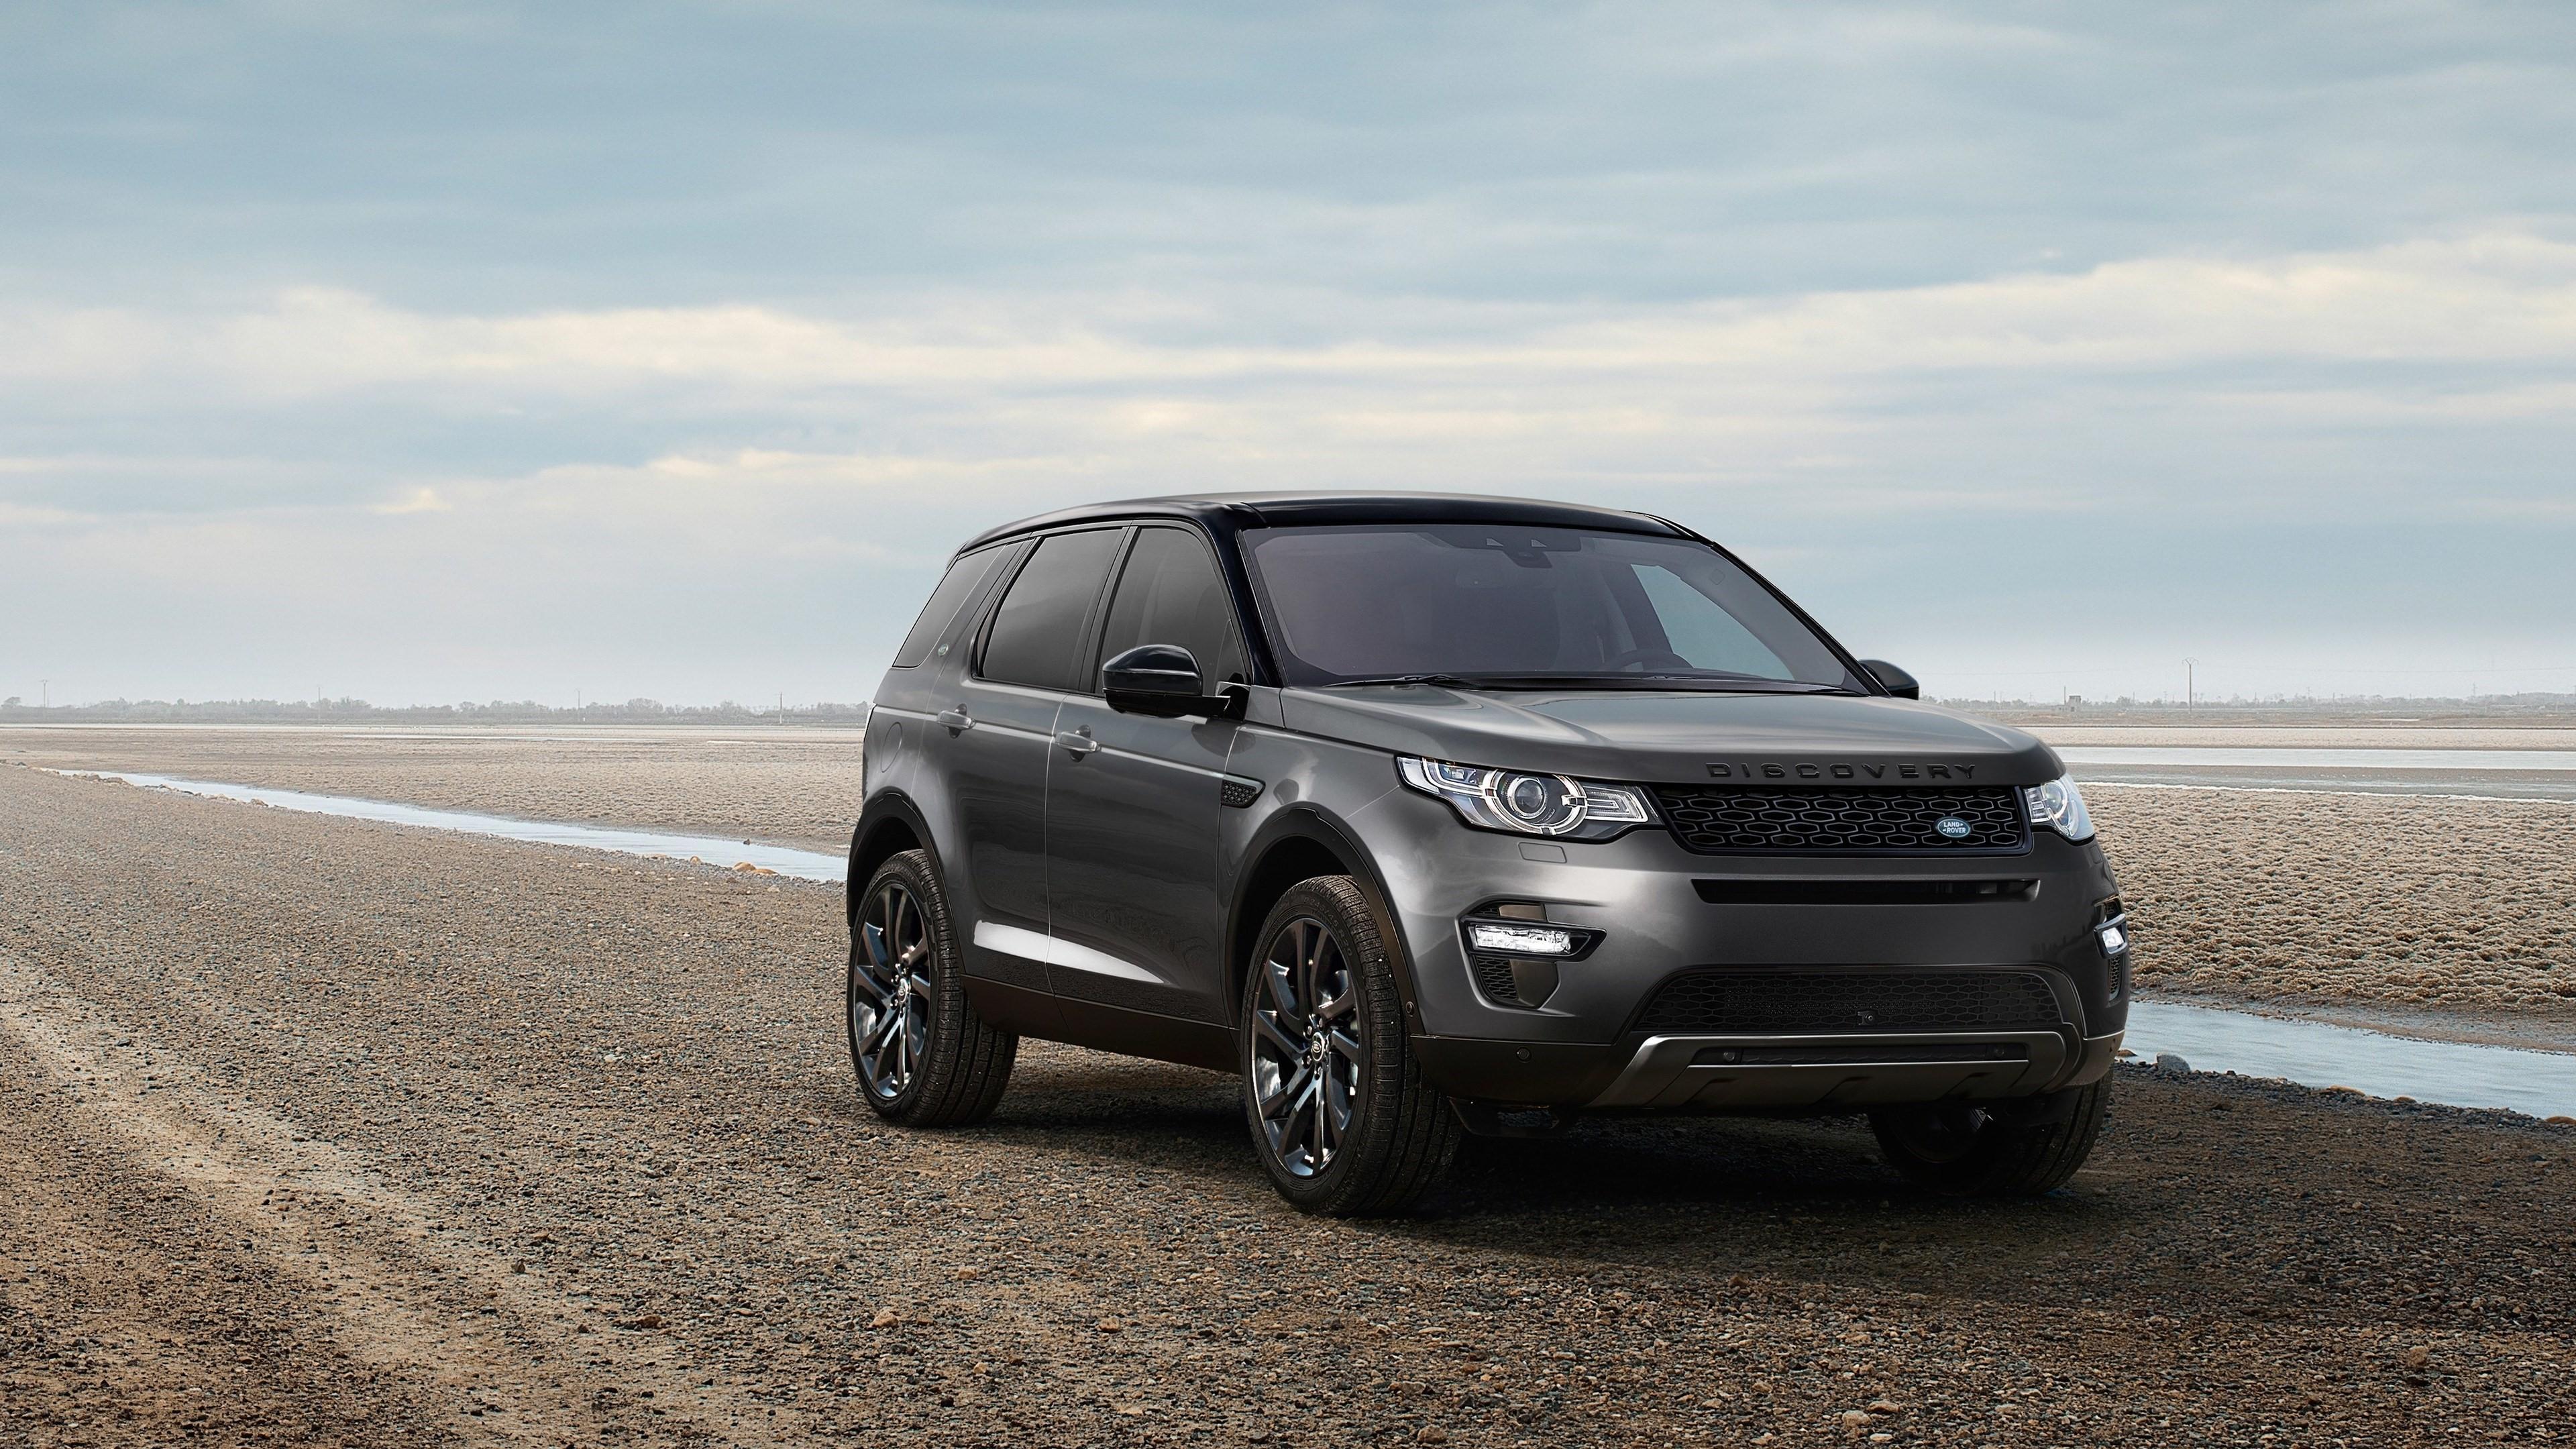 HD wallpaper, 2017 Land Rover Discovery Sport 4K